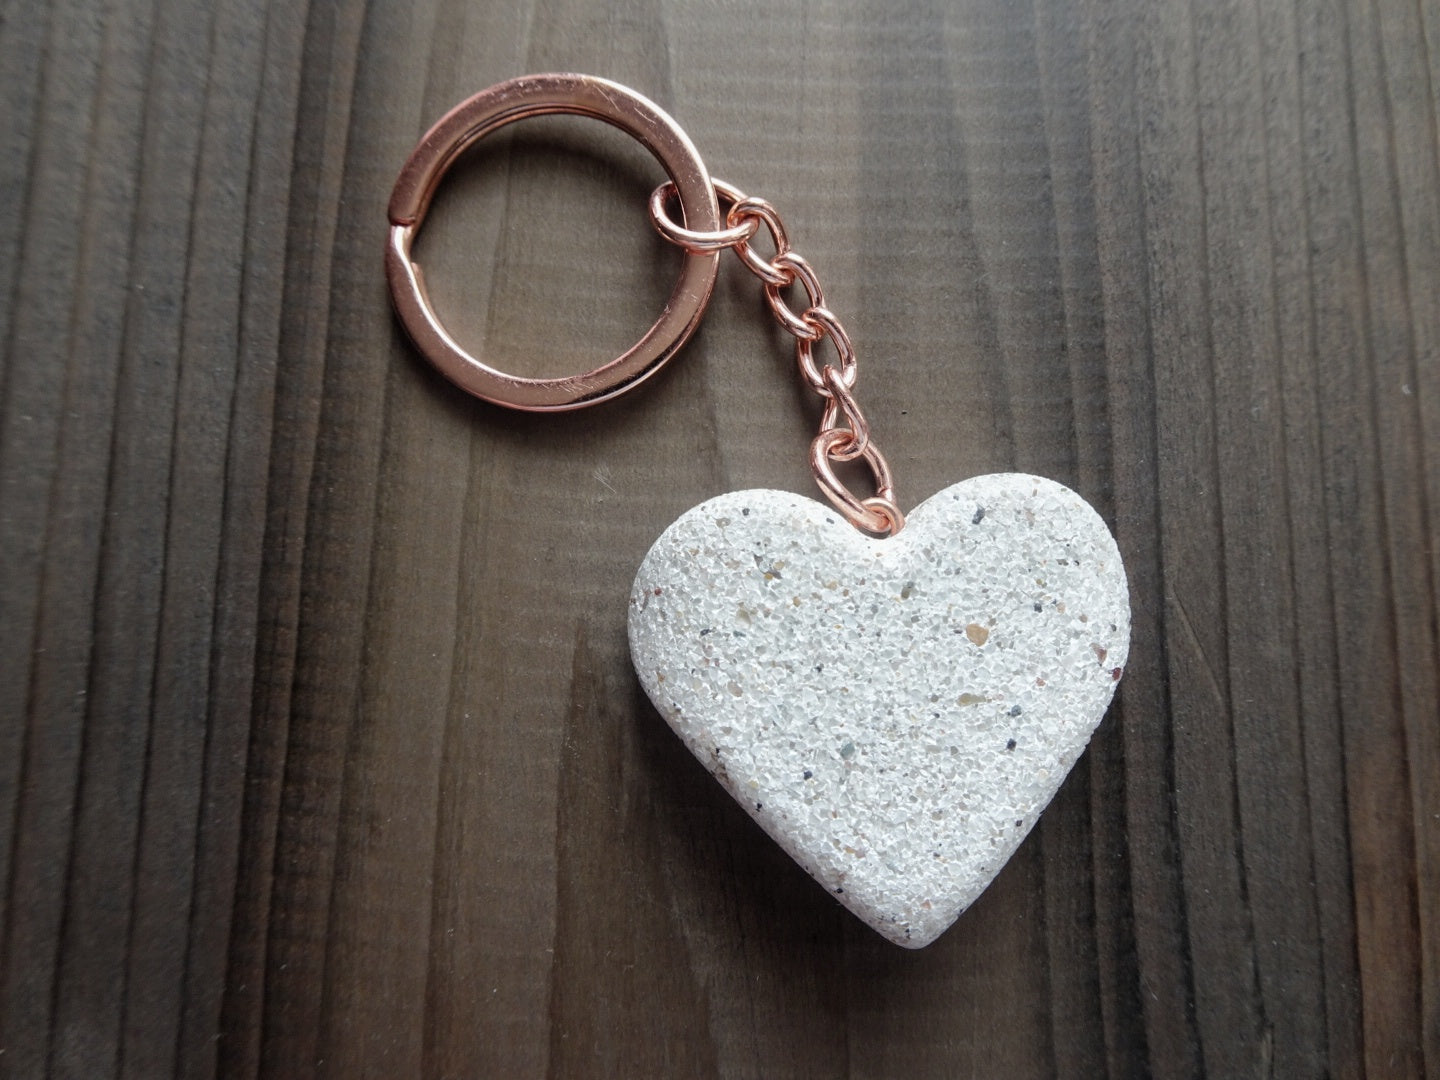 Sparkling White Stone Heart-Shaped Keychain with Rose Gold Finish Displayed on Dark Stained Board - Elegant Accessory